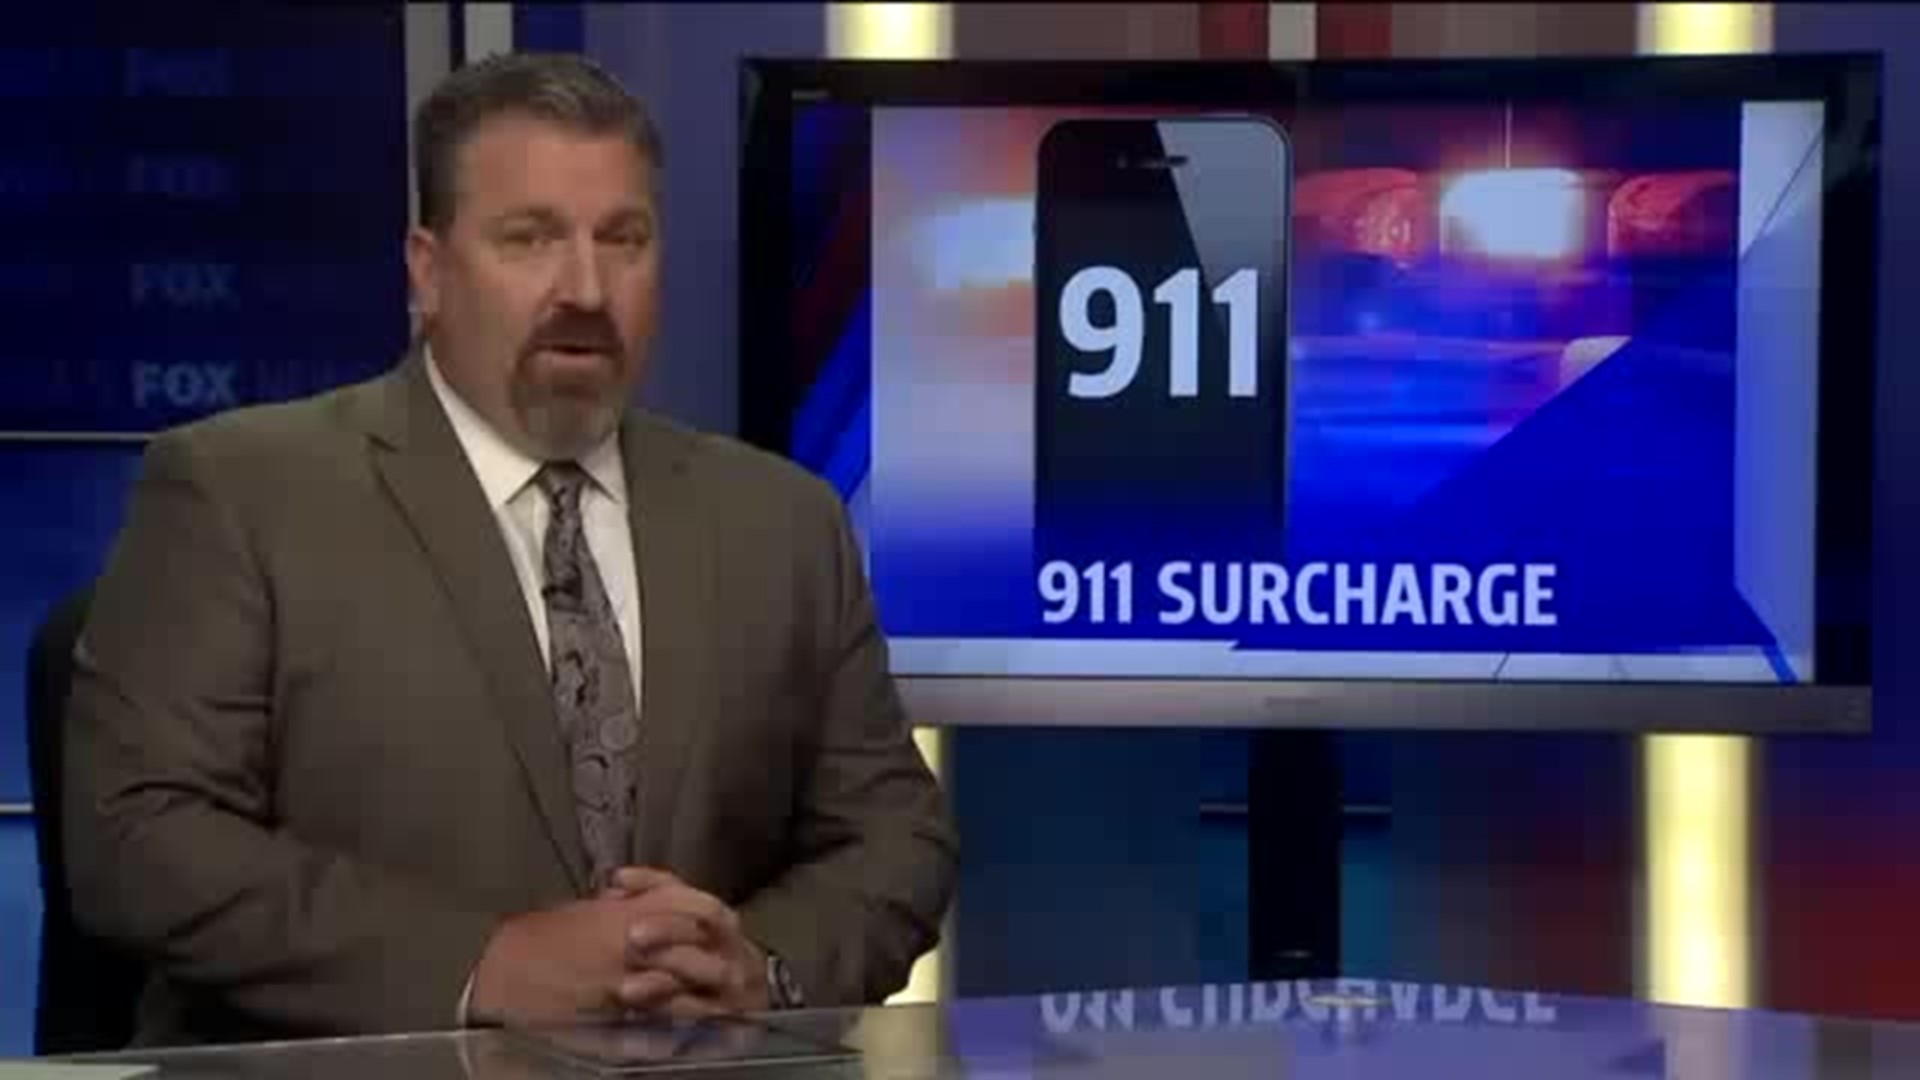 Phone bills could increase to fund 911 centers